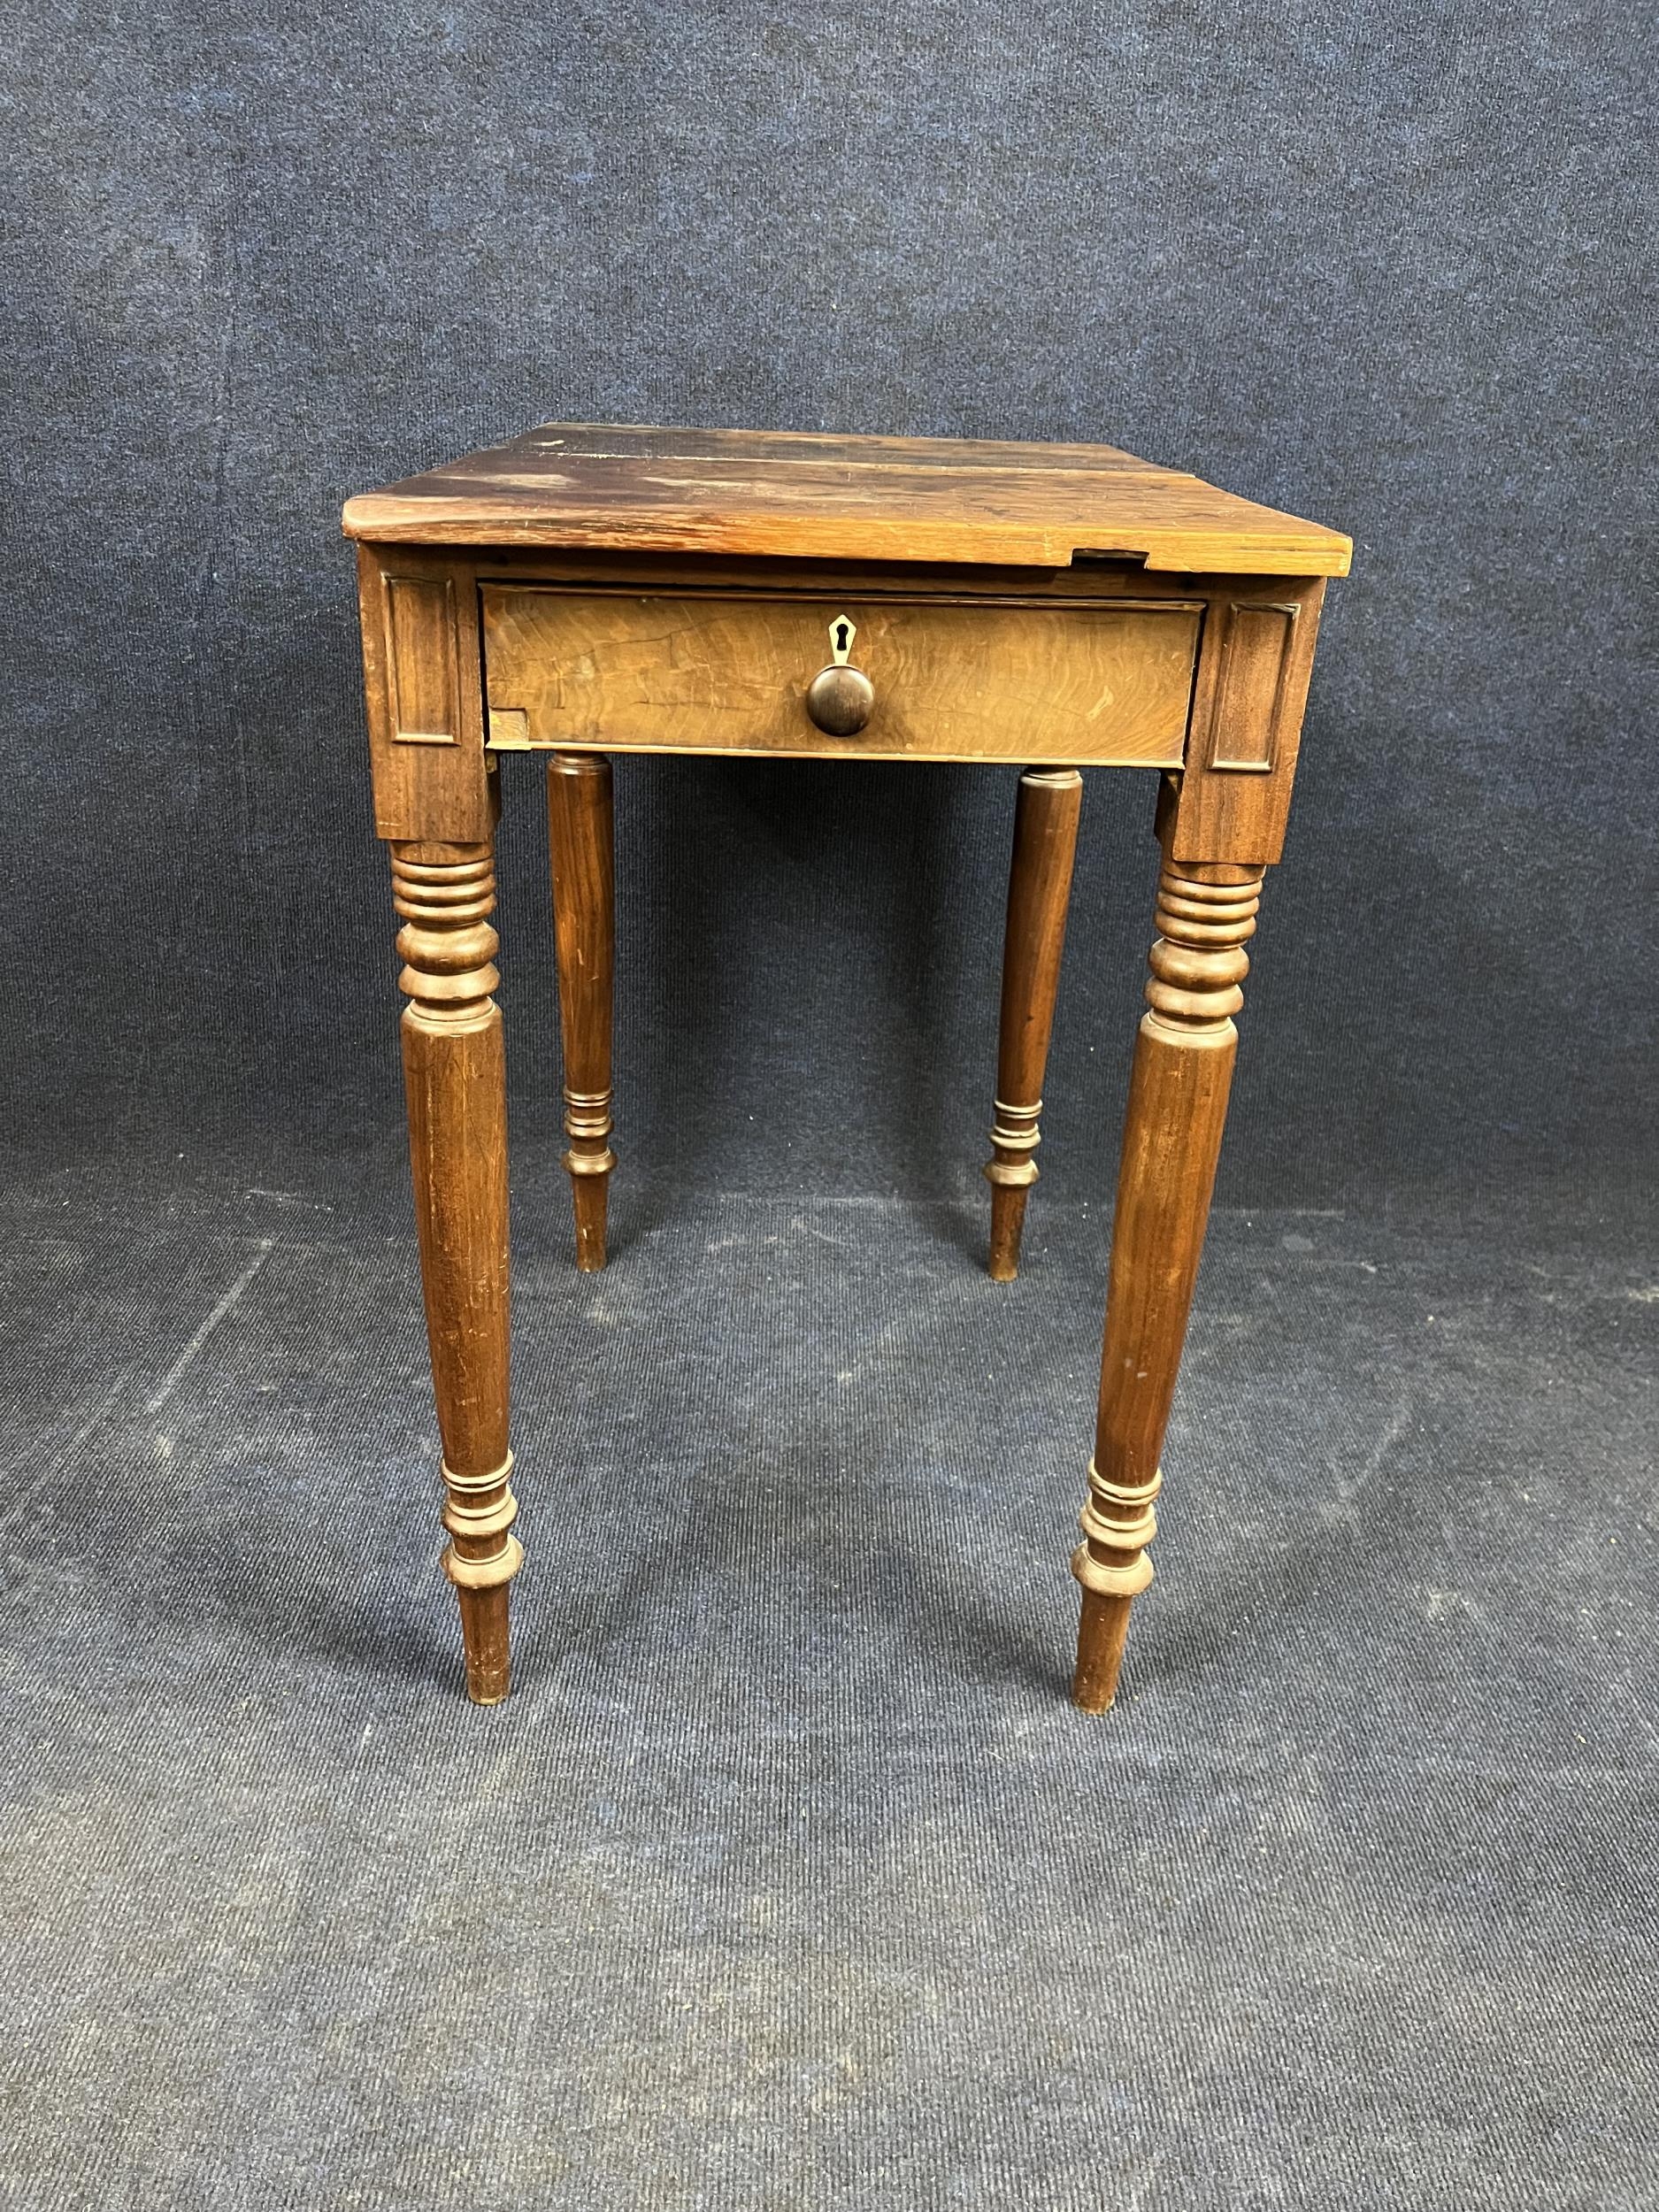 A 19th century mahogany side table. H.72 W.65 D.42.cm - Image 2 of 6